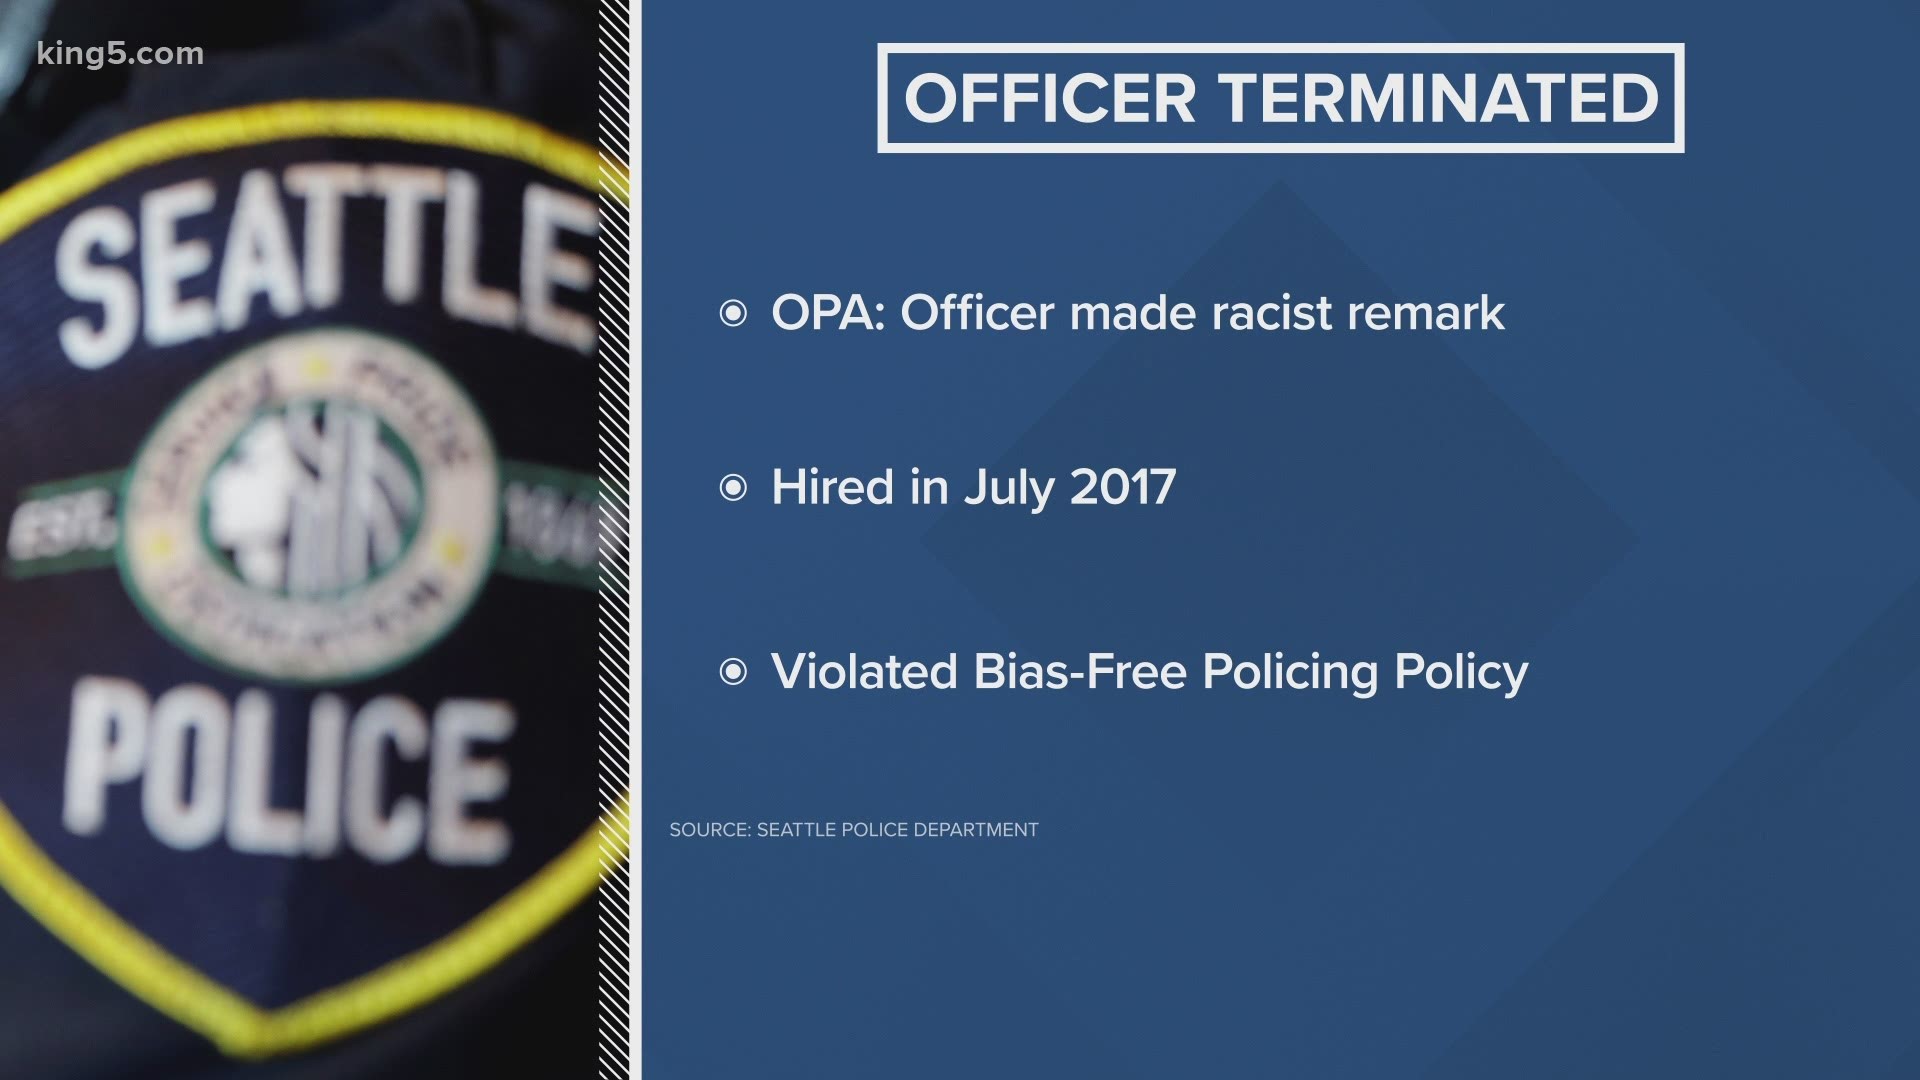 The Office of Police Accountability found the officer violated the Seattle Police Department's policies of bias-free policing and professional conduct.